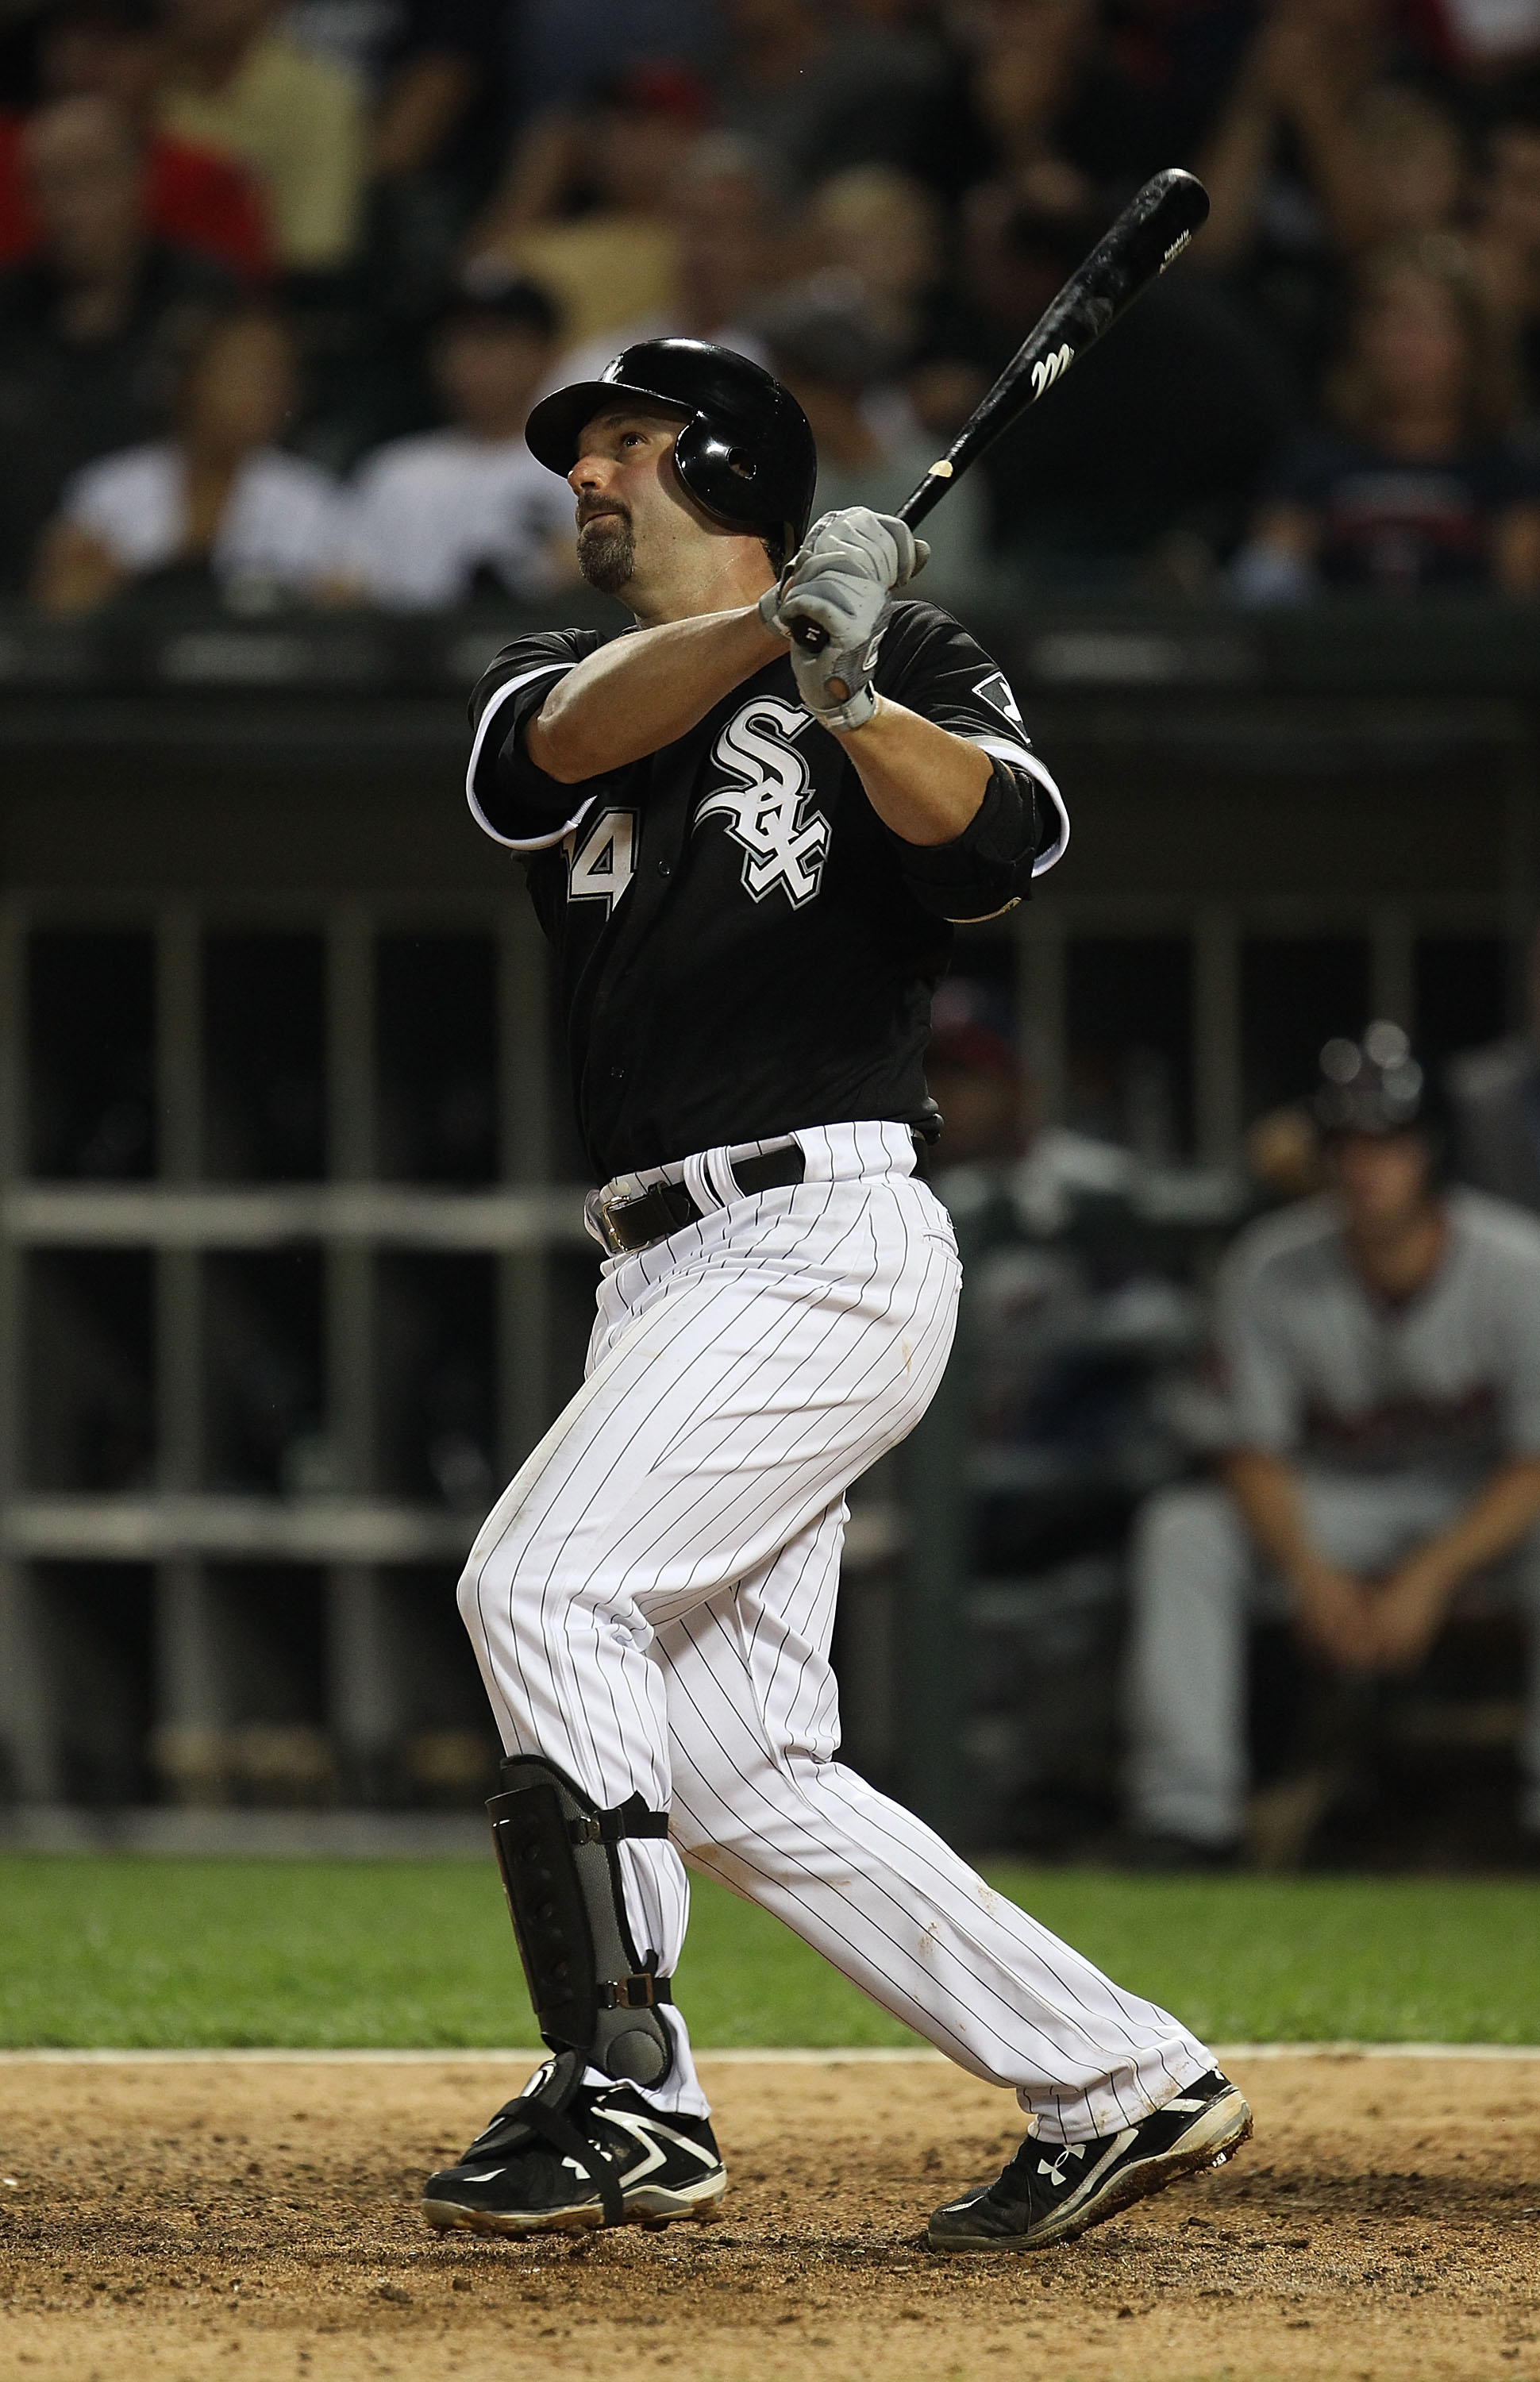 CHICAGO - AUGUST 10: Paul Konerko #14 of the Chicago White Sox hits a double against the Minnesota Twins at U.S. Cellular Field on August 10, 2010 in Chicago, Illinois. The Twins defeated the White Sox 12-6. (Photo by Jonathan Daniel/Getty Images)